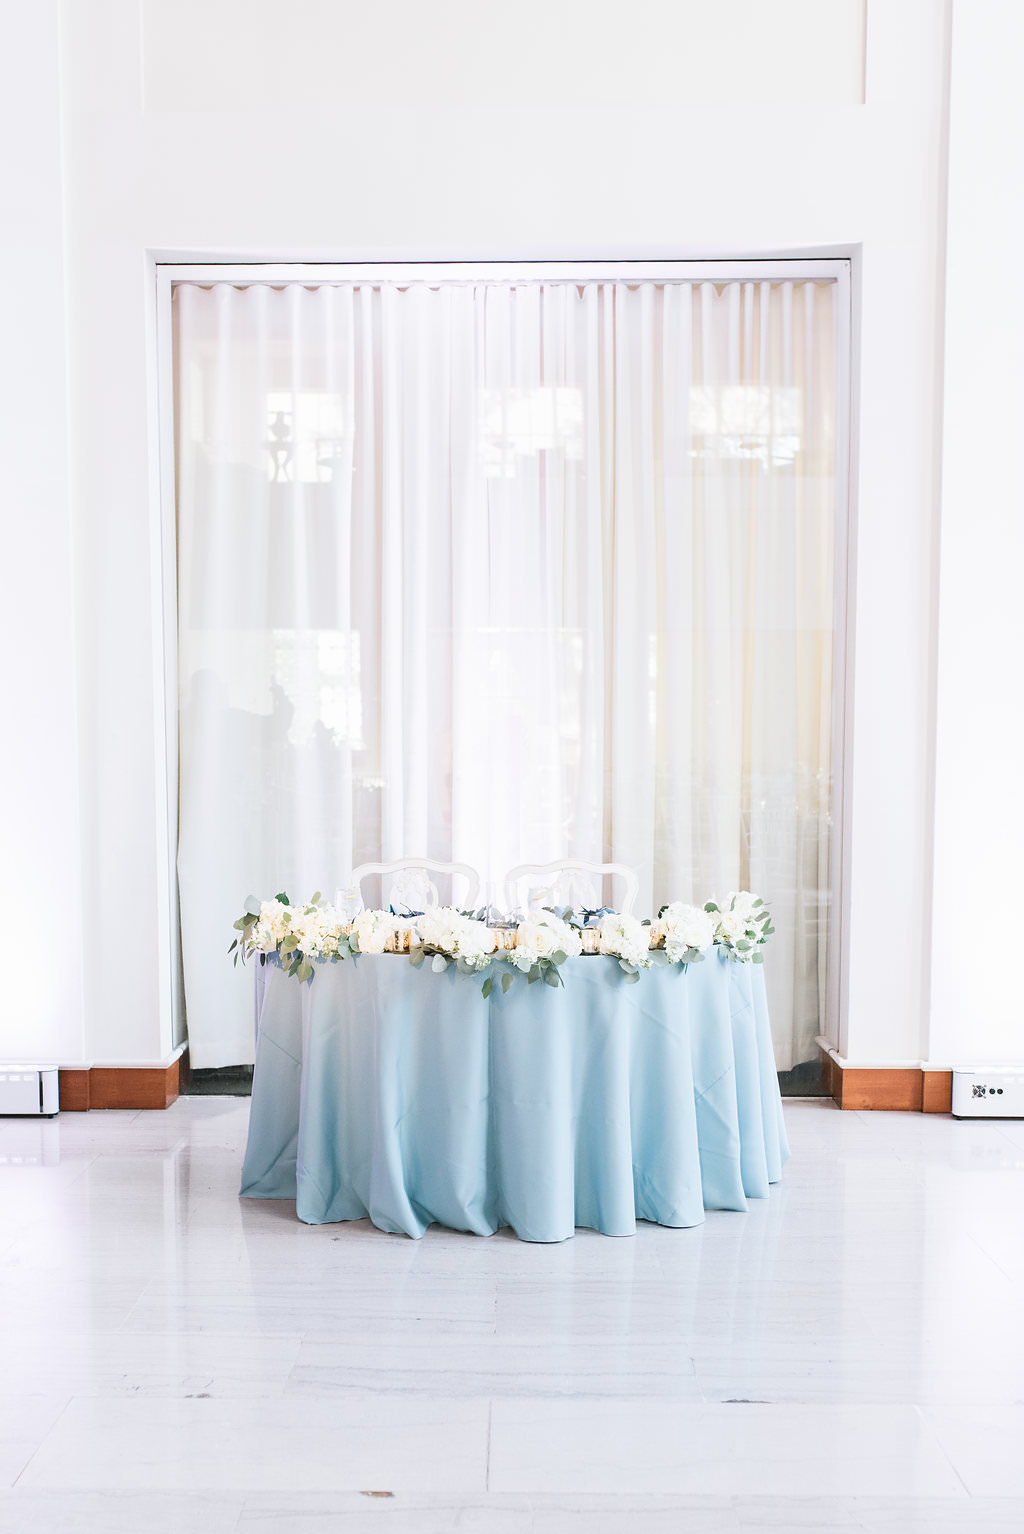 Elegant, Classic Wedding Reception Decor, Sweetheart Table with Dusty Blue Tablecloth, White and Greenery Florals with White Draping Background | Downtown Tampa Wedding Venue The Vault